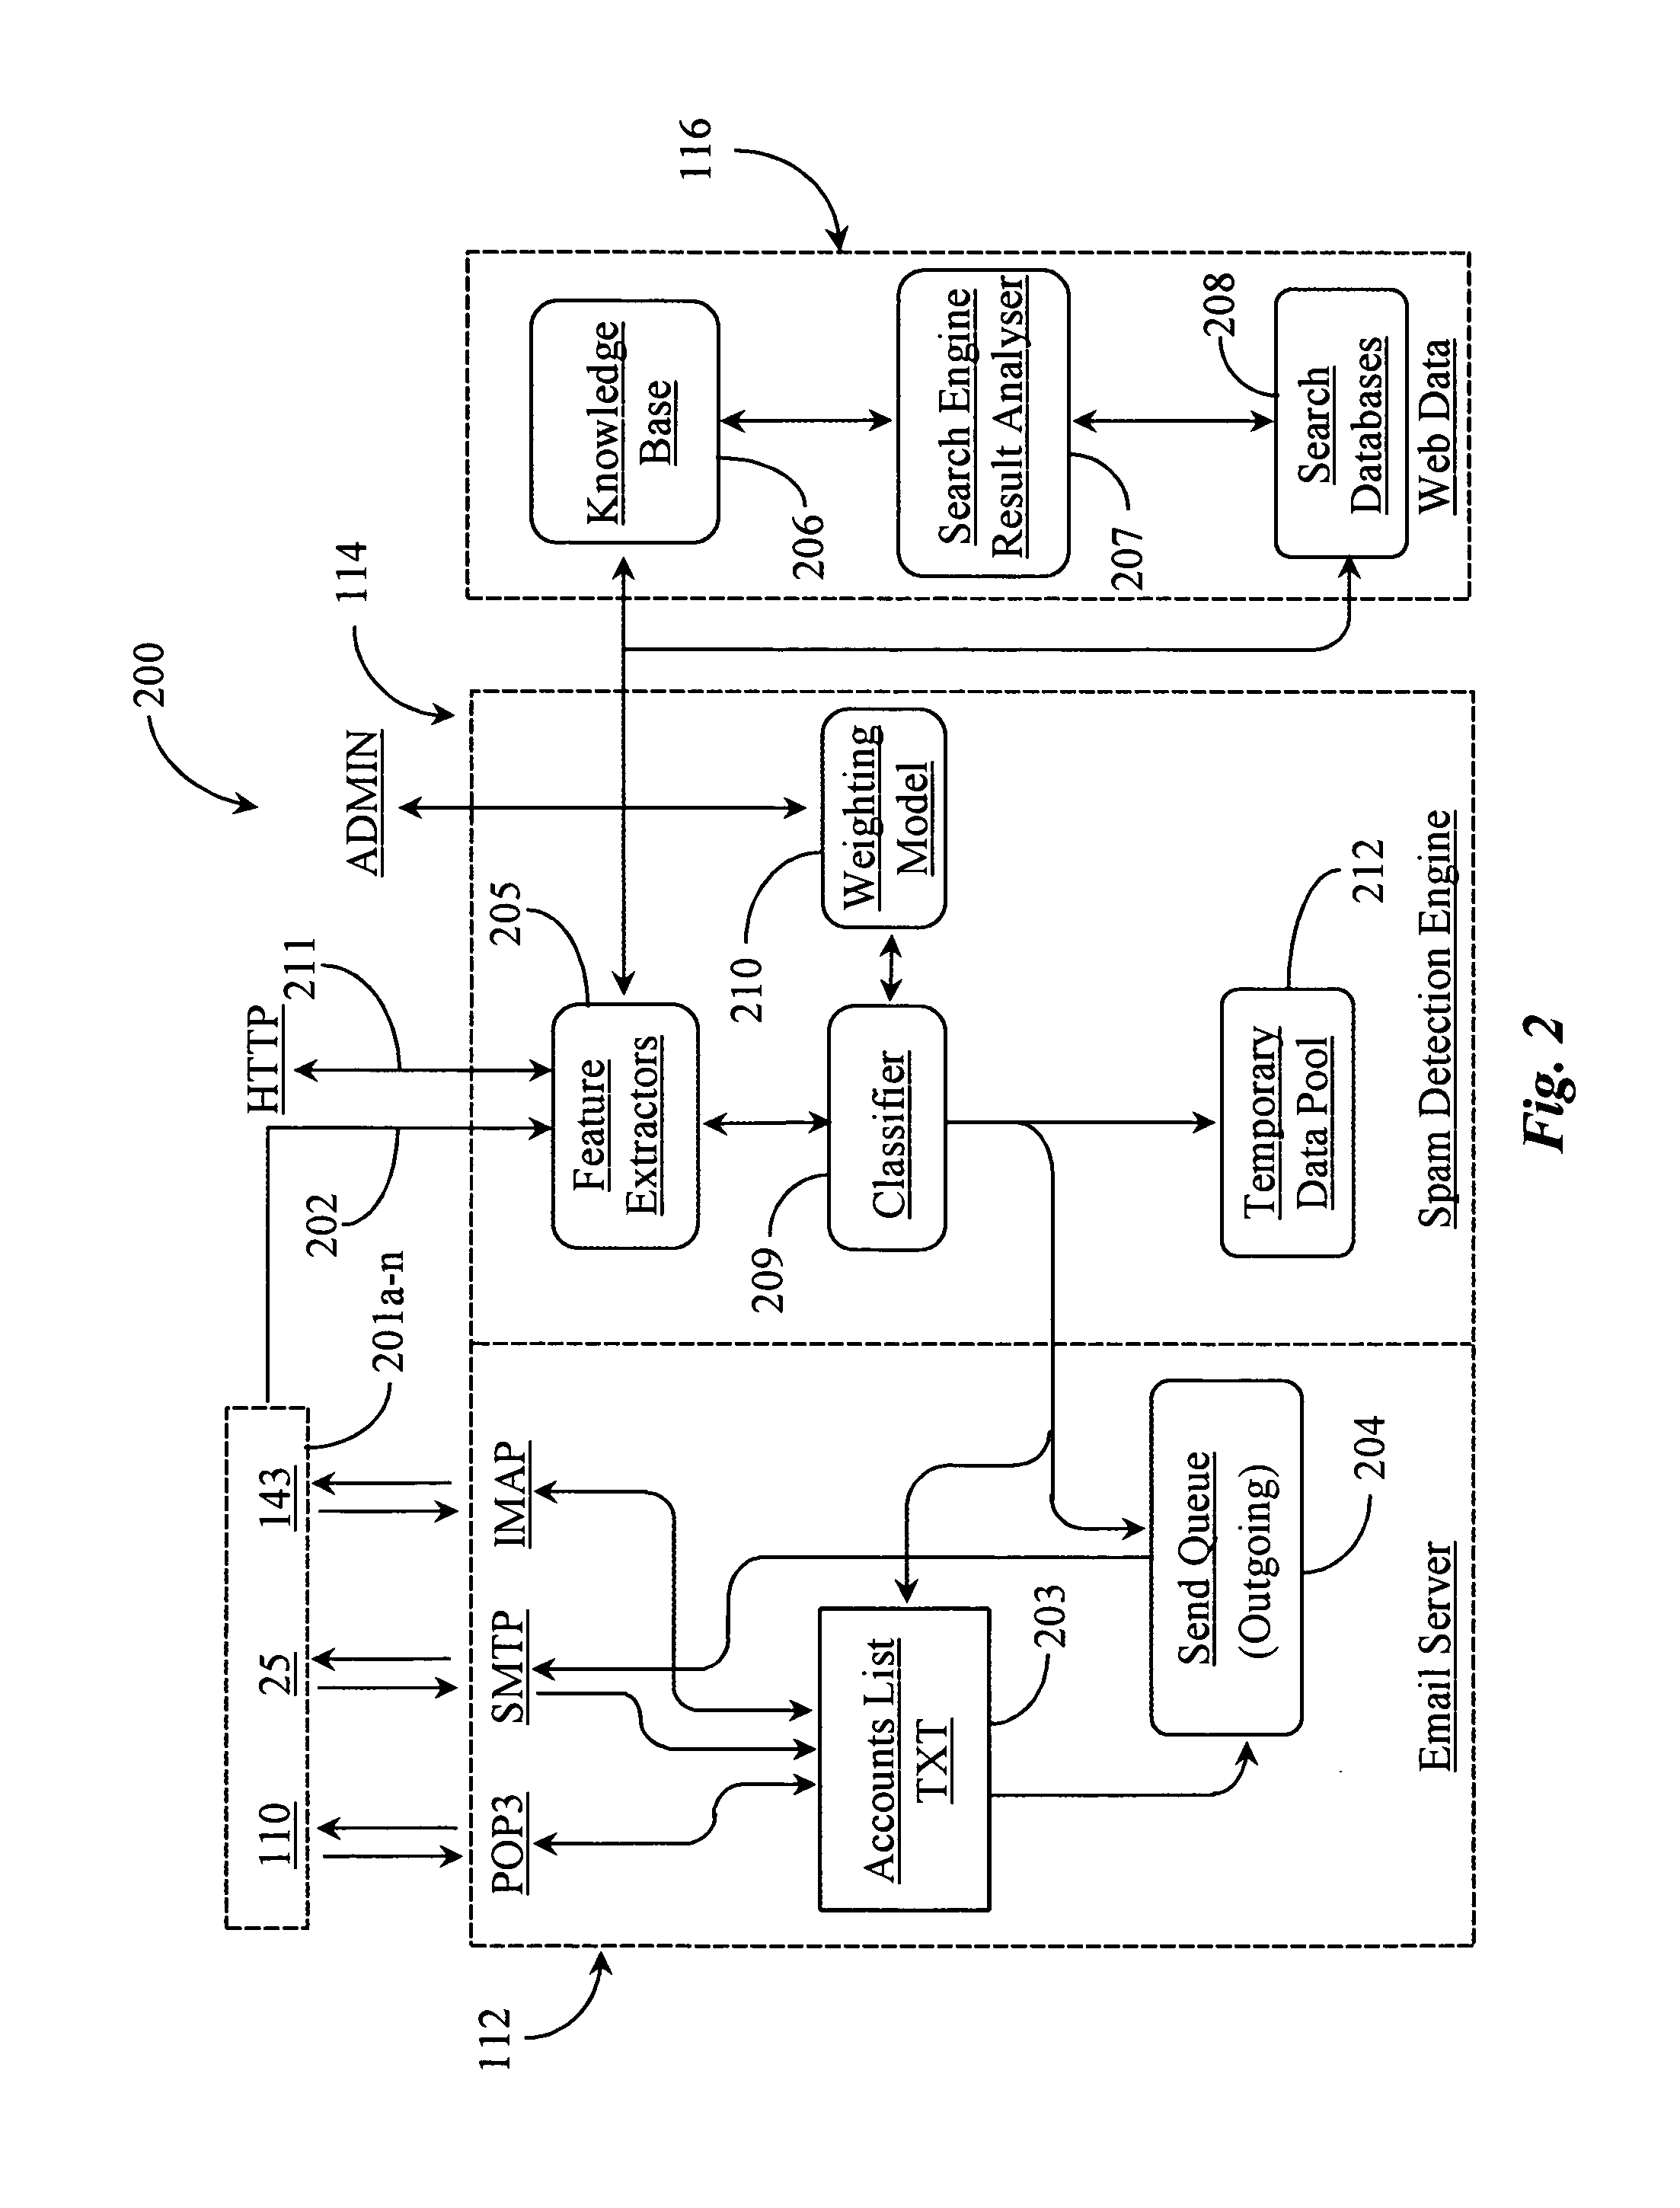 Methods and apparatus for detecting spam messages in an email system